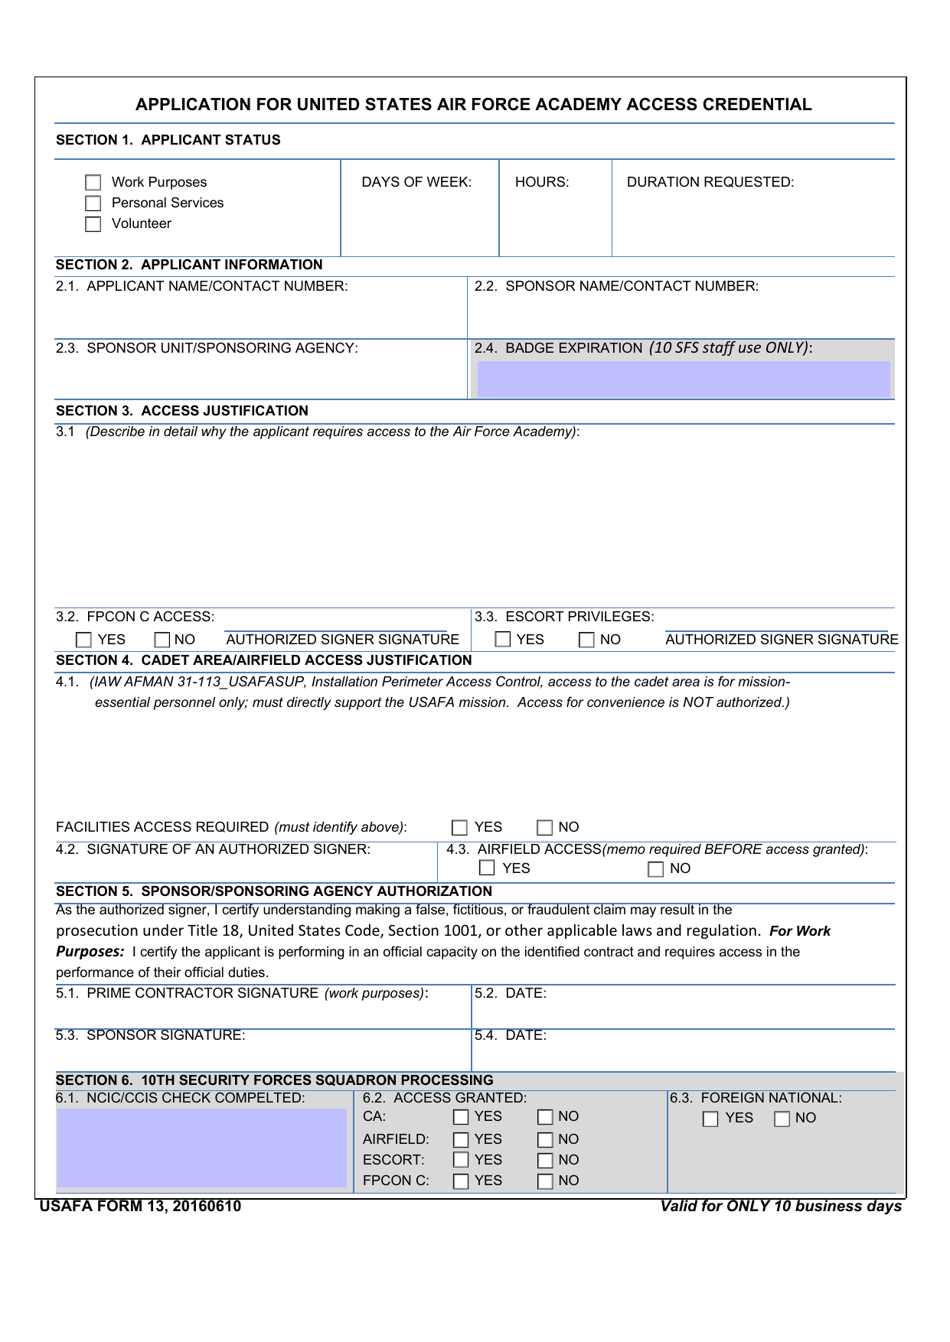 USAFA Form 13 Application for United States Air Force Academy Access Credential, Page 1